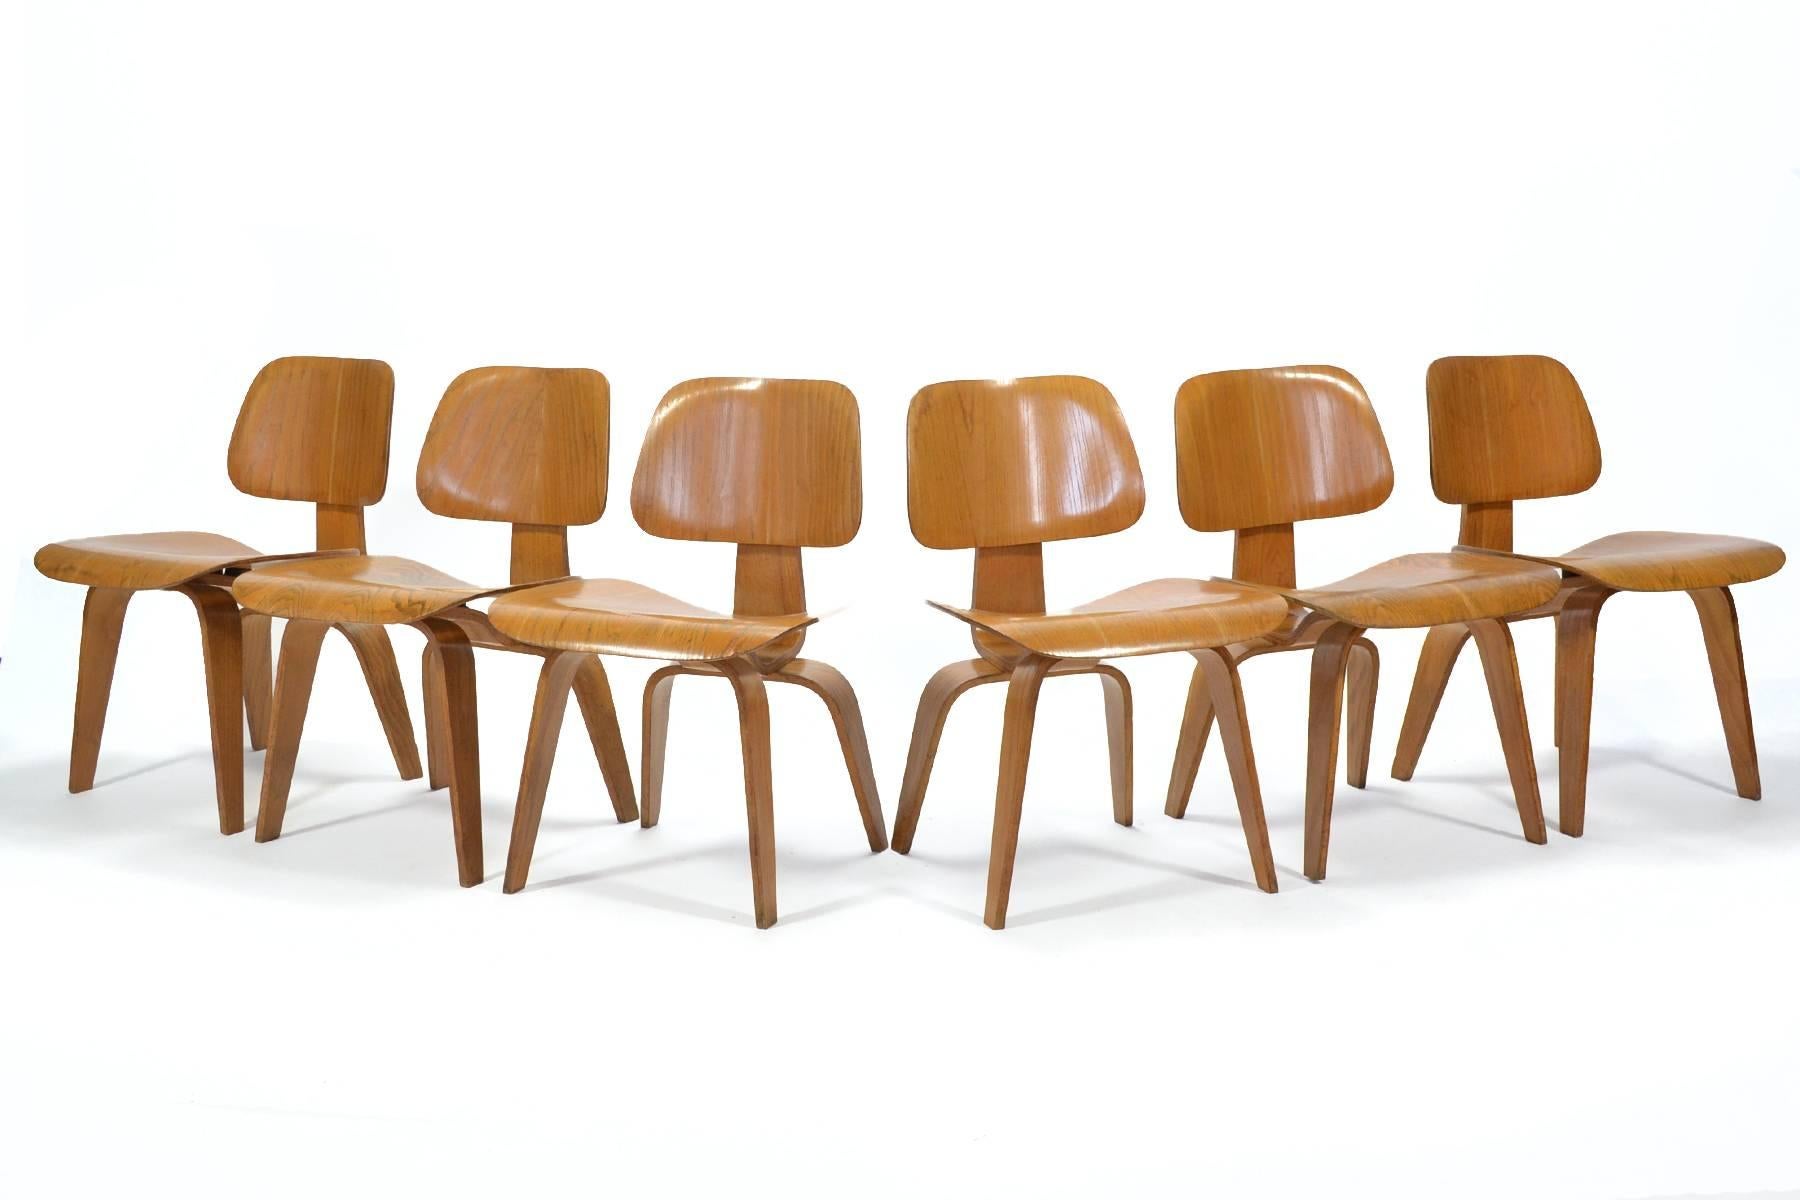 This rare set six of early Eames DCW (Dining Chair Wood) were produced by Evans for Herman Miller in the late 1940s. One of Charles and Ray's most important designs, the DCW was the result of their wartime experiments in molding plywood. They were